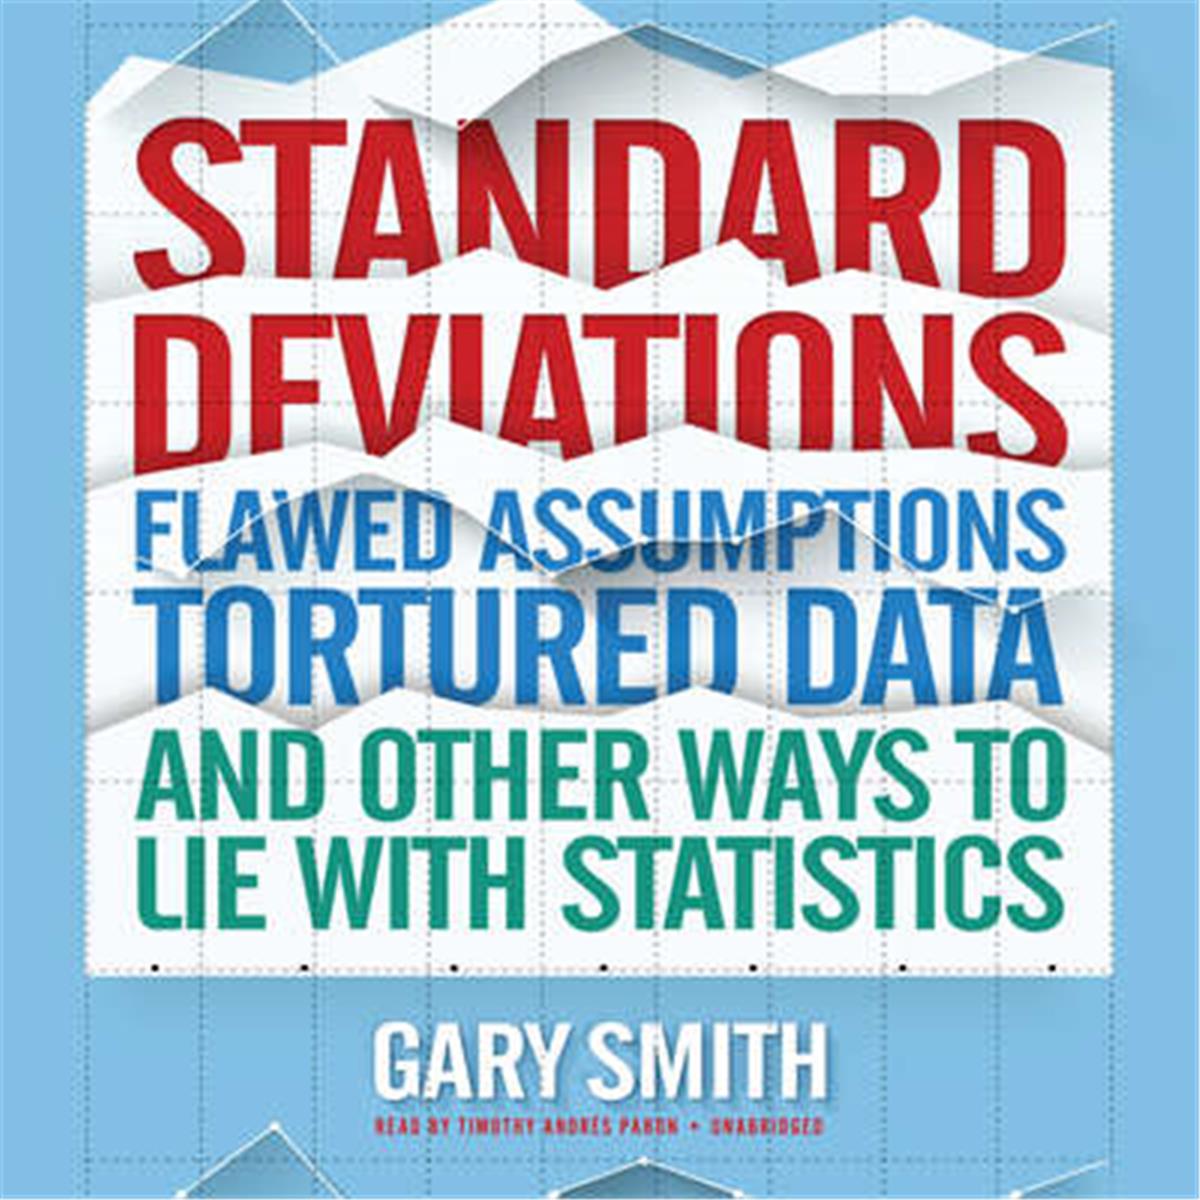 Picture of Blackstone Audio 9781469066035 Standard Deviations - Flawed Assumptions Audio Book